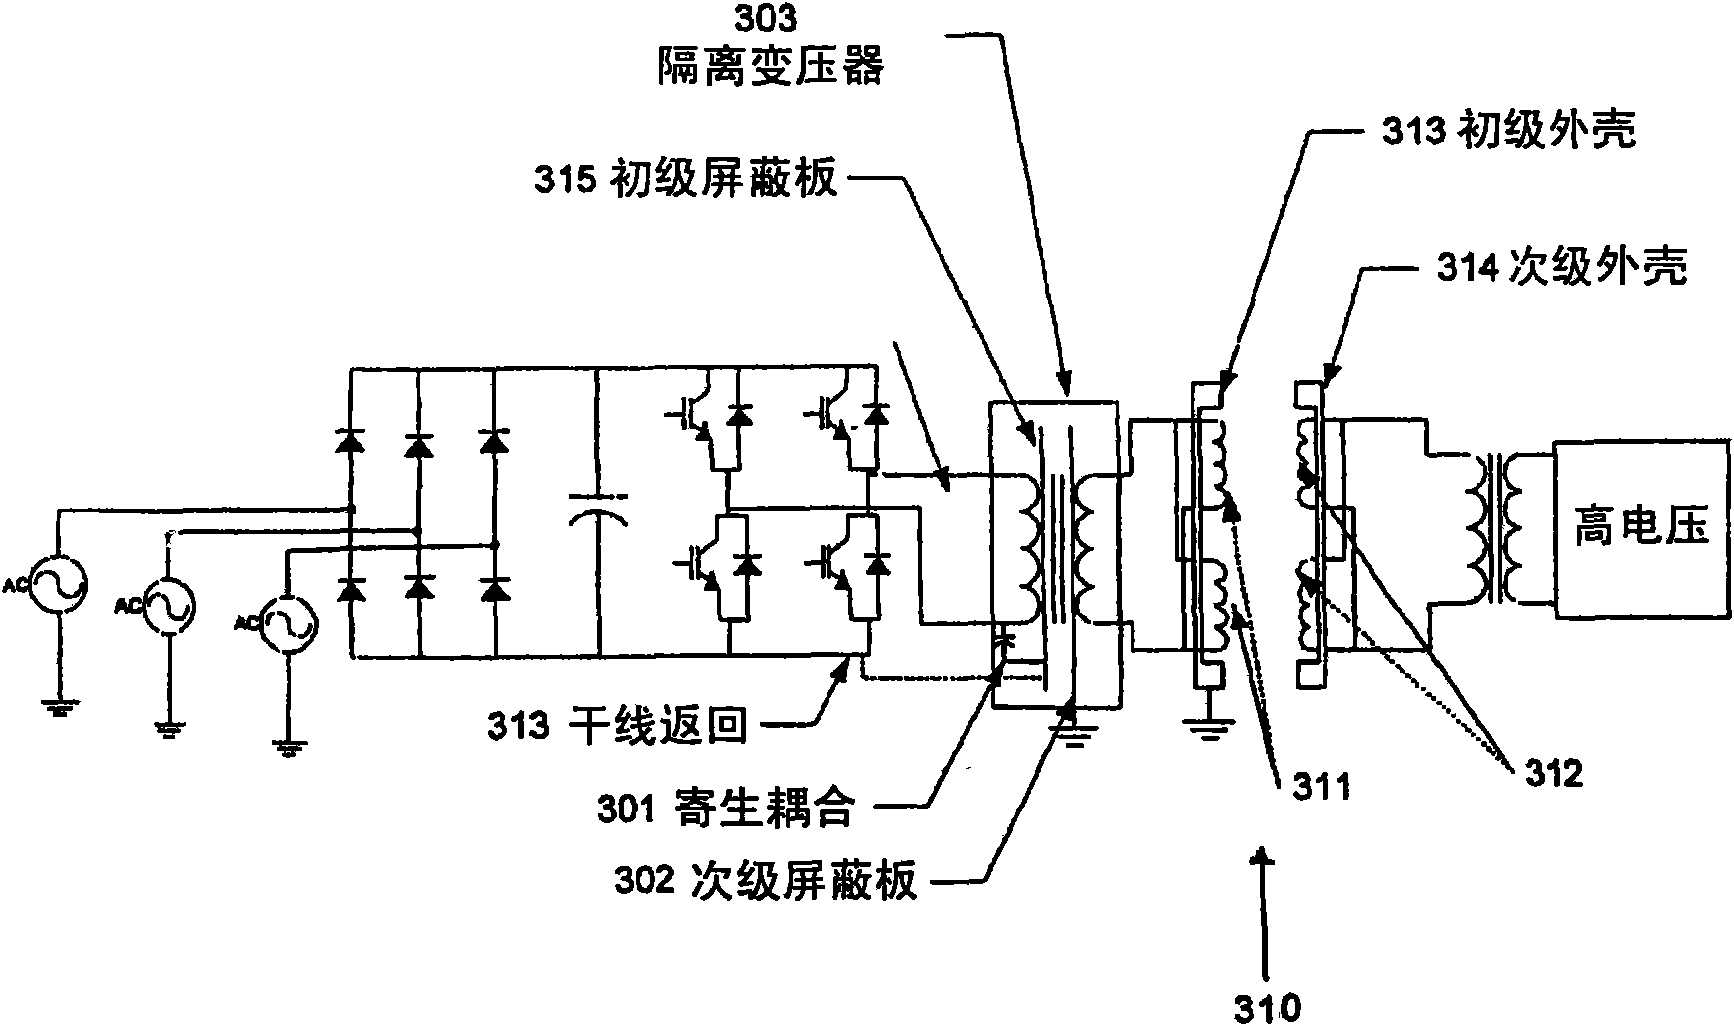 Non-contact rotary power transfer system